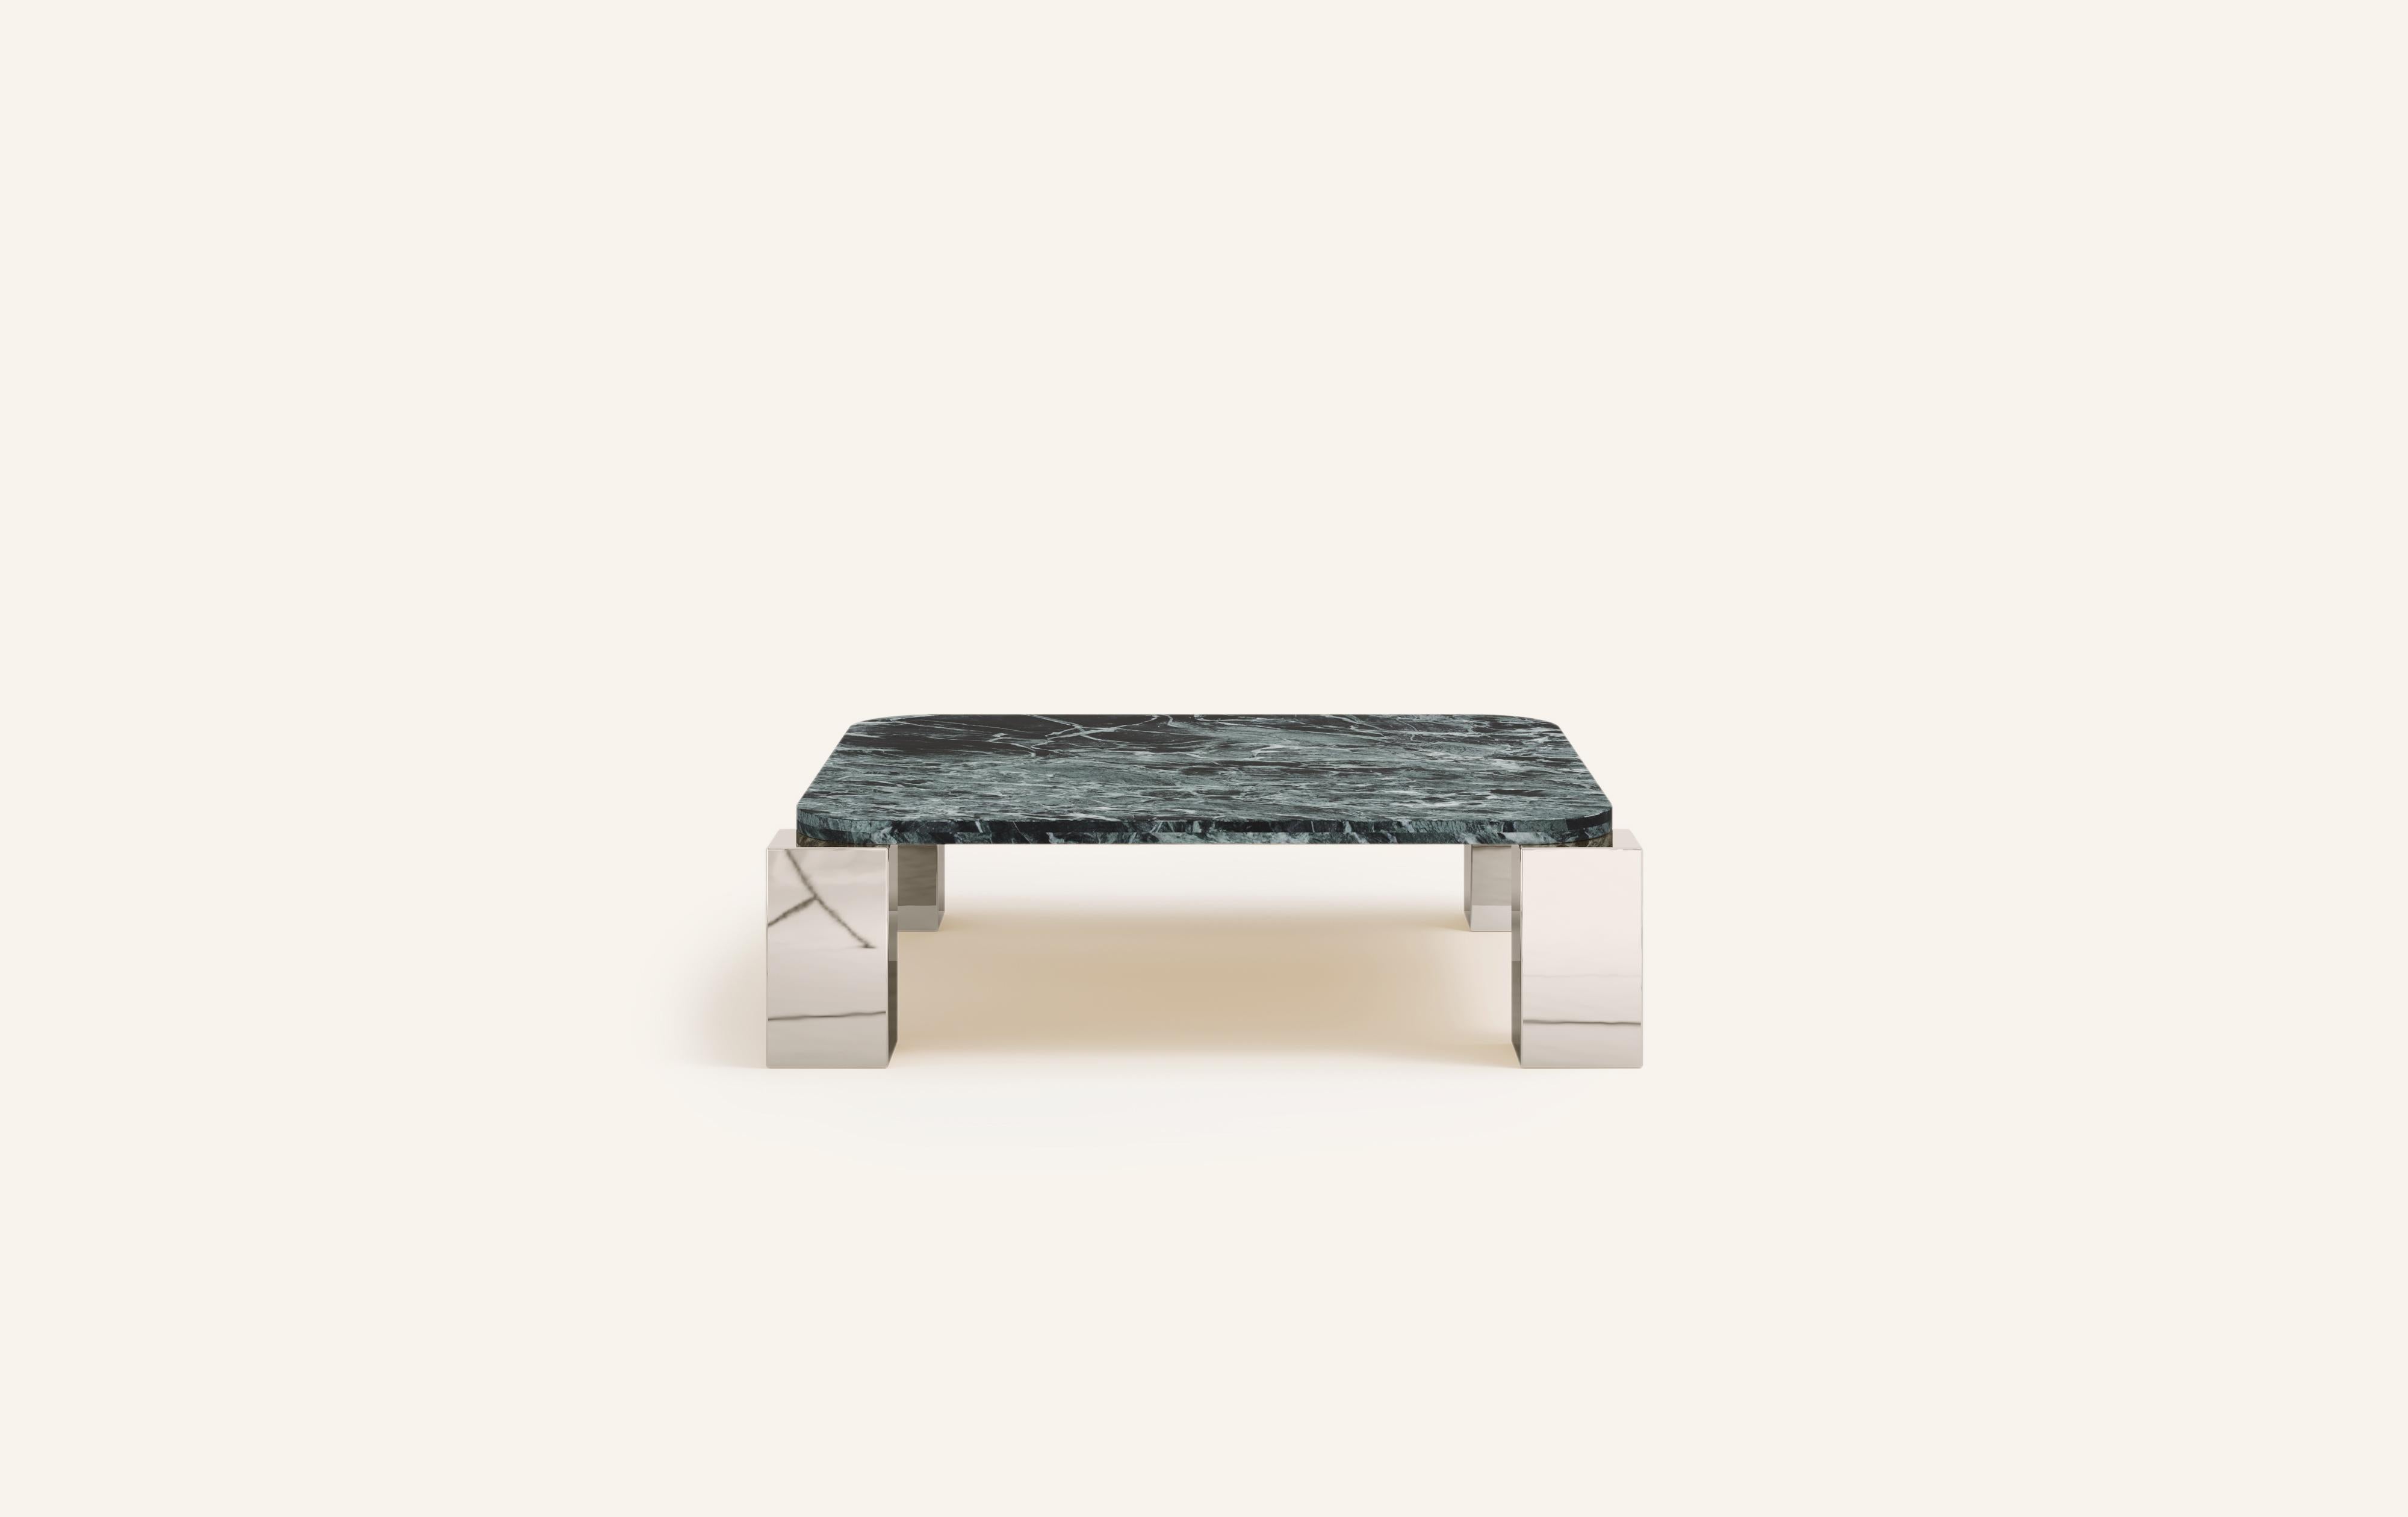 MONOLITHIC FORMS SOFTENED BY GENTLE EDGES. WITH ITS BOLD MARBLE PATTERNS CUBO IS AS VERSATILE AS IT IS STRIKING.

DIMENSIONS:
62”L x 62”W x 14”H: 
- 60”L x 60”W x 1.5” THICK TABLETOP WITH WITH 6